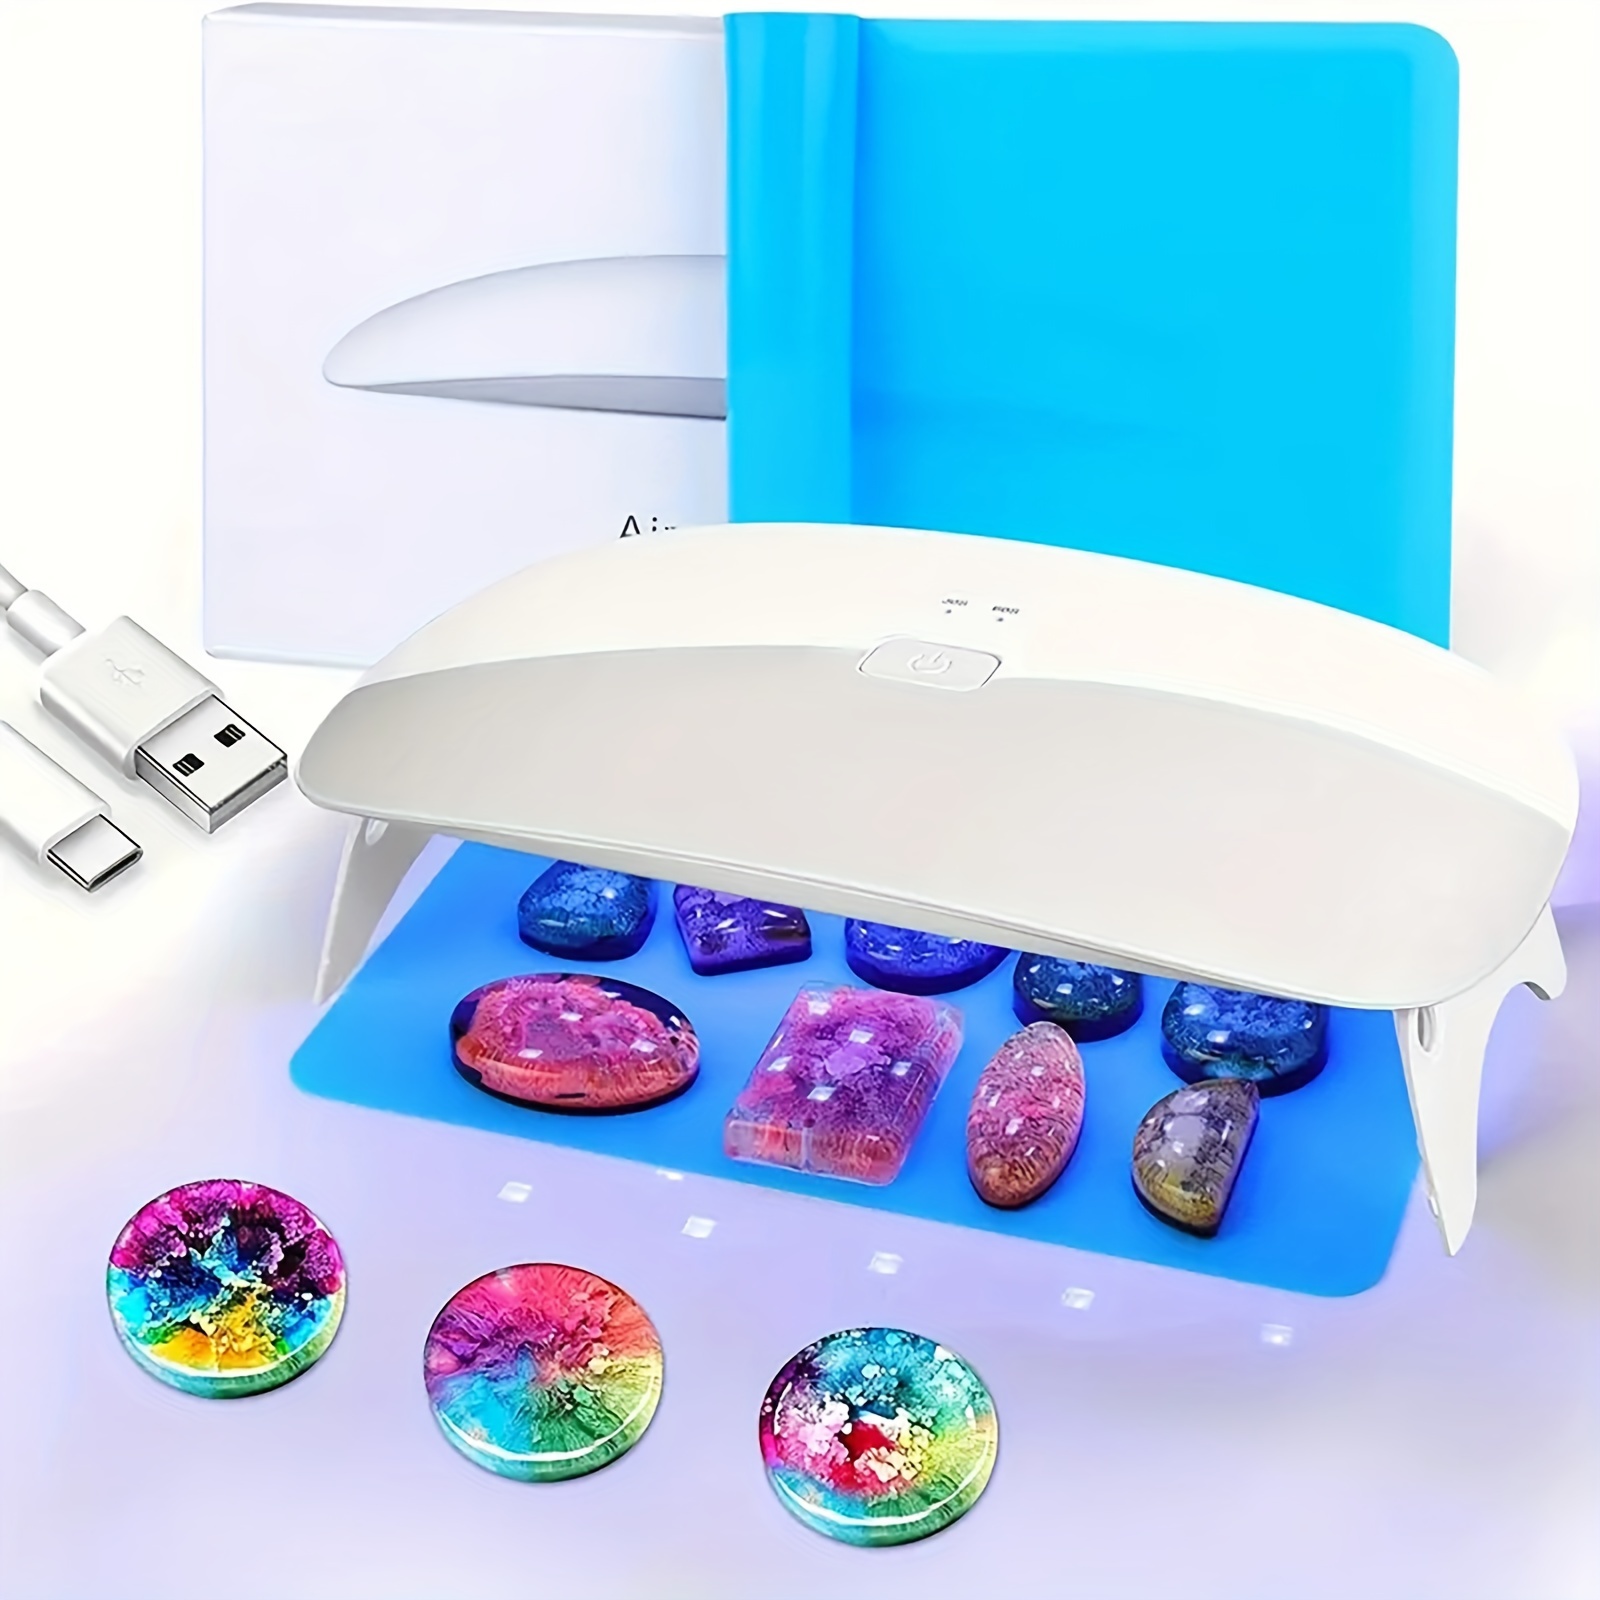 Large Size Foldable Uv/led Resin Light With 15/18 Or Double Light Source  Lamp Beads, Fast Curing Uv Lamp Resin Curing Machine For Uv Resin Kit, Resin  Supplies Jewelry Making, Curing Light For